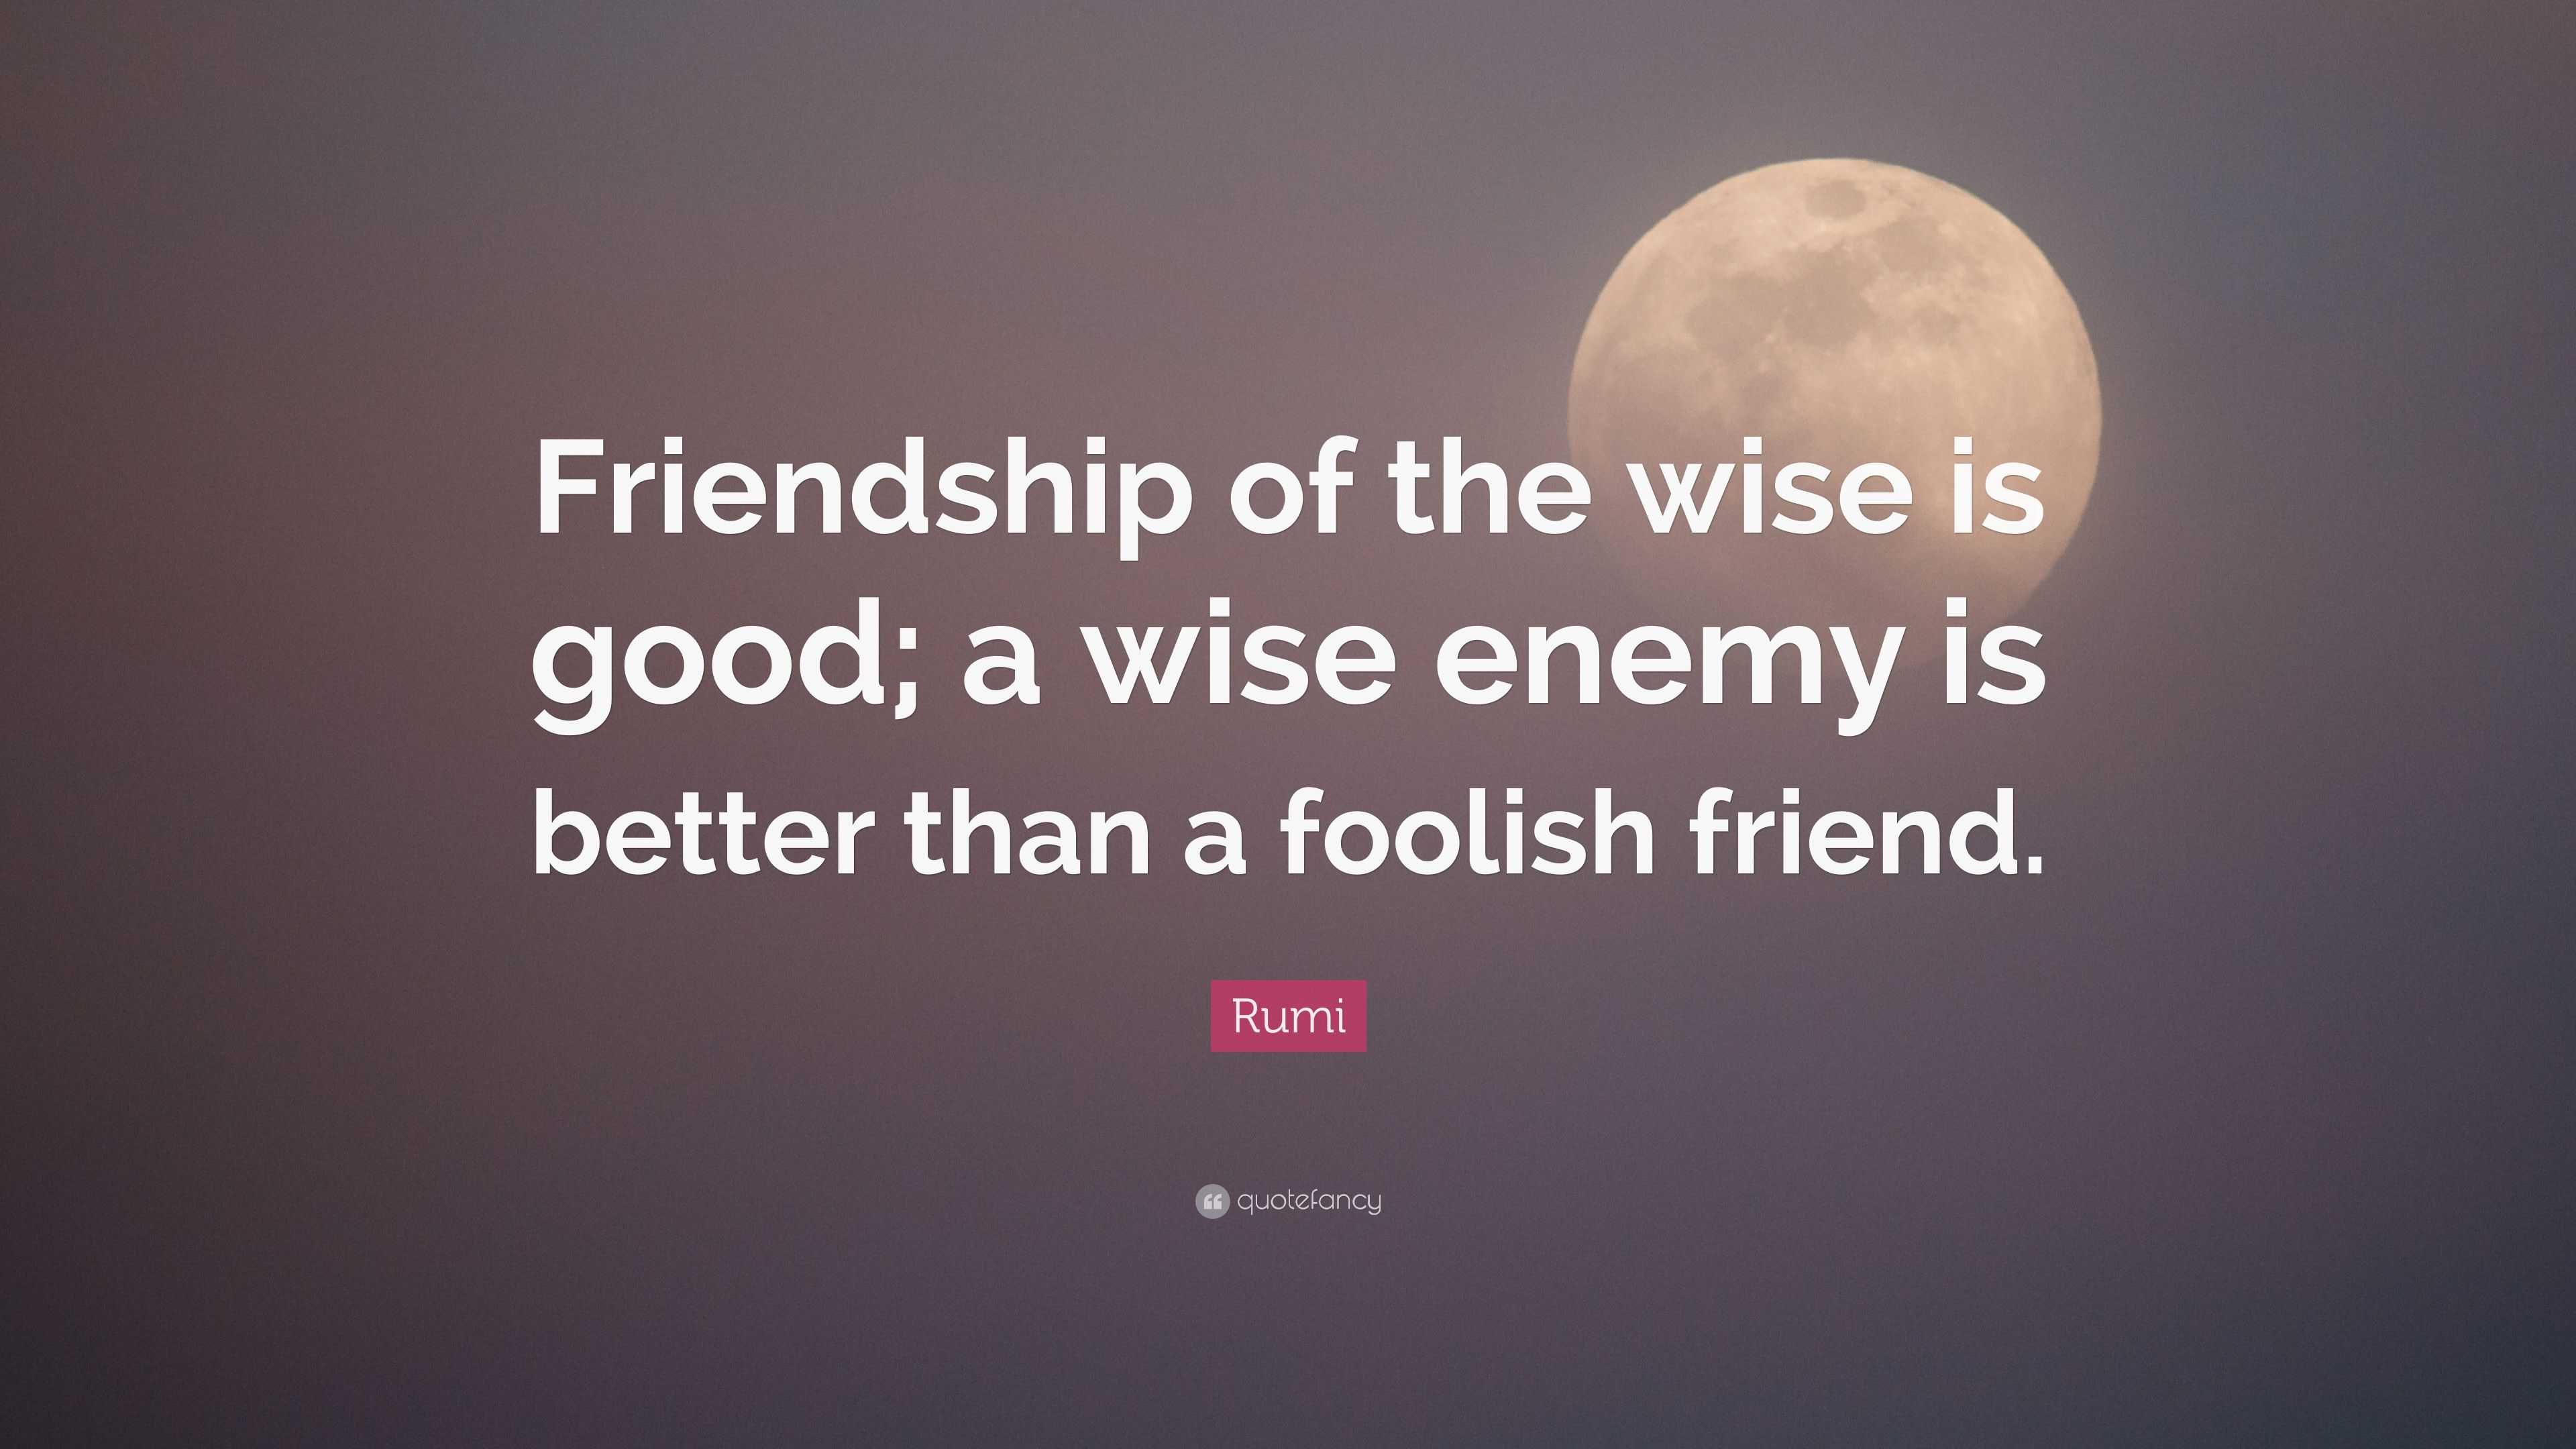 Rumi Quote: “Friendship of the wise is good; a wise enemy is better